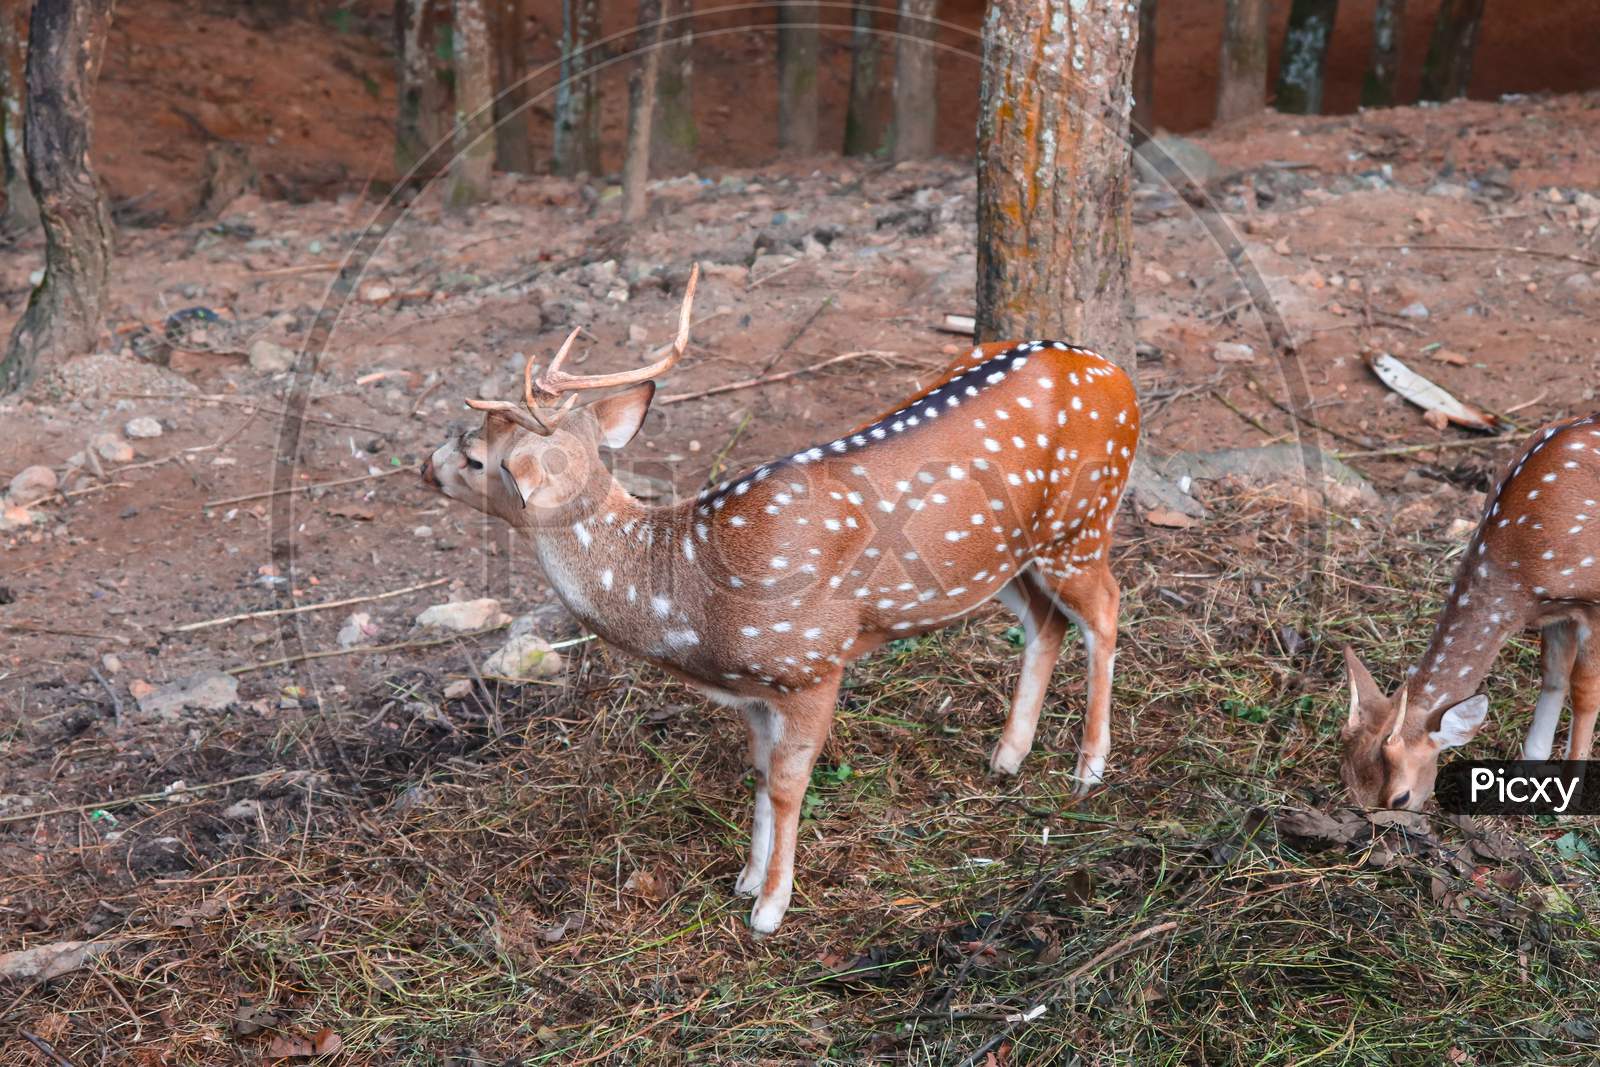 himalayan Spotted deer found in Nepal.